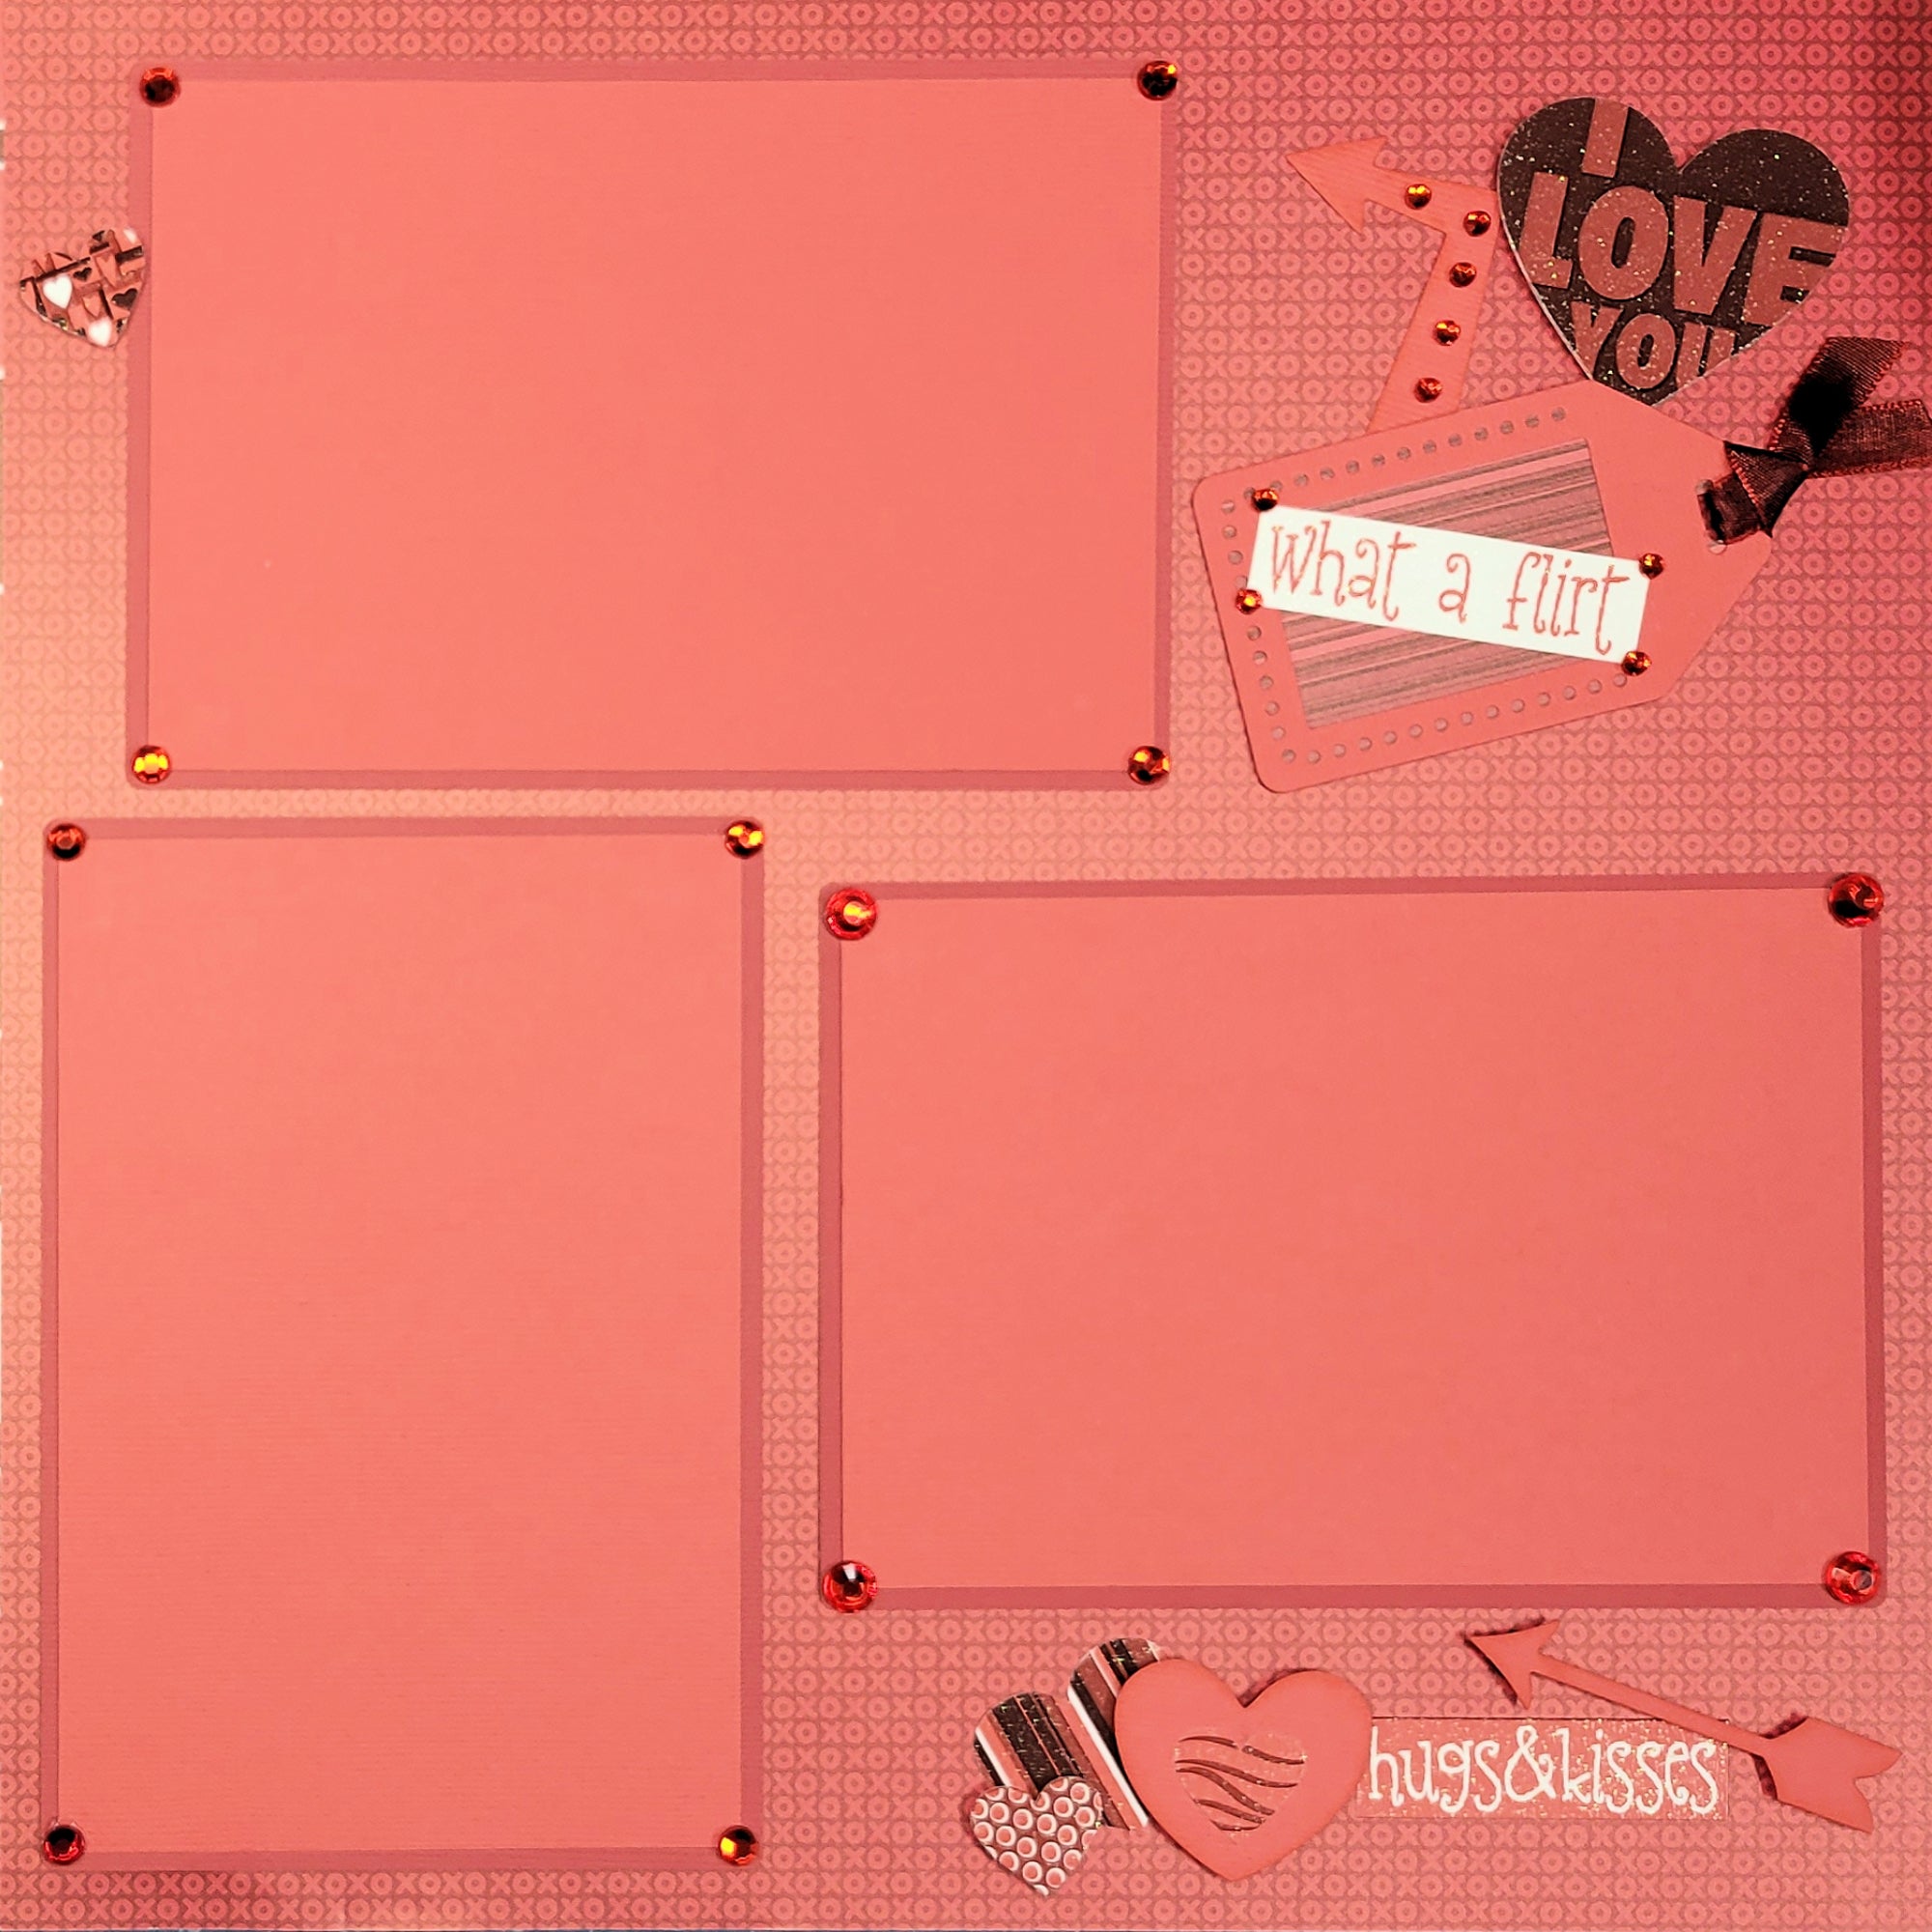 What a Flirt Valentine (2) - 12 x 12 Pages, Fully-Assembled & Hand-Crafted 3D Scrapbook Premade by SSC Designs